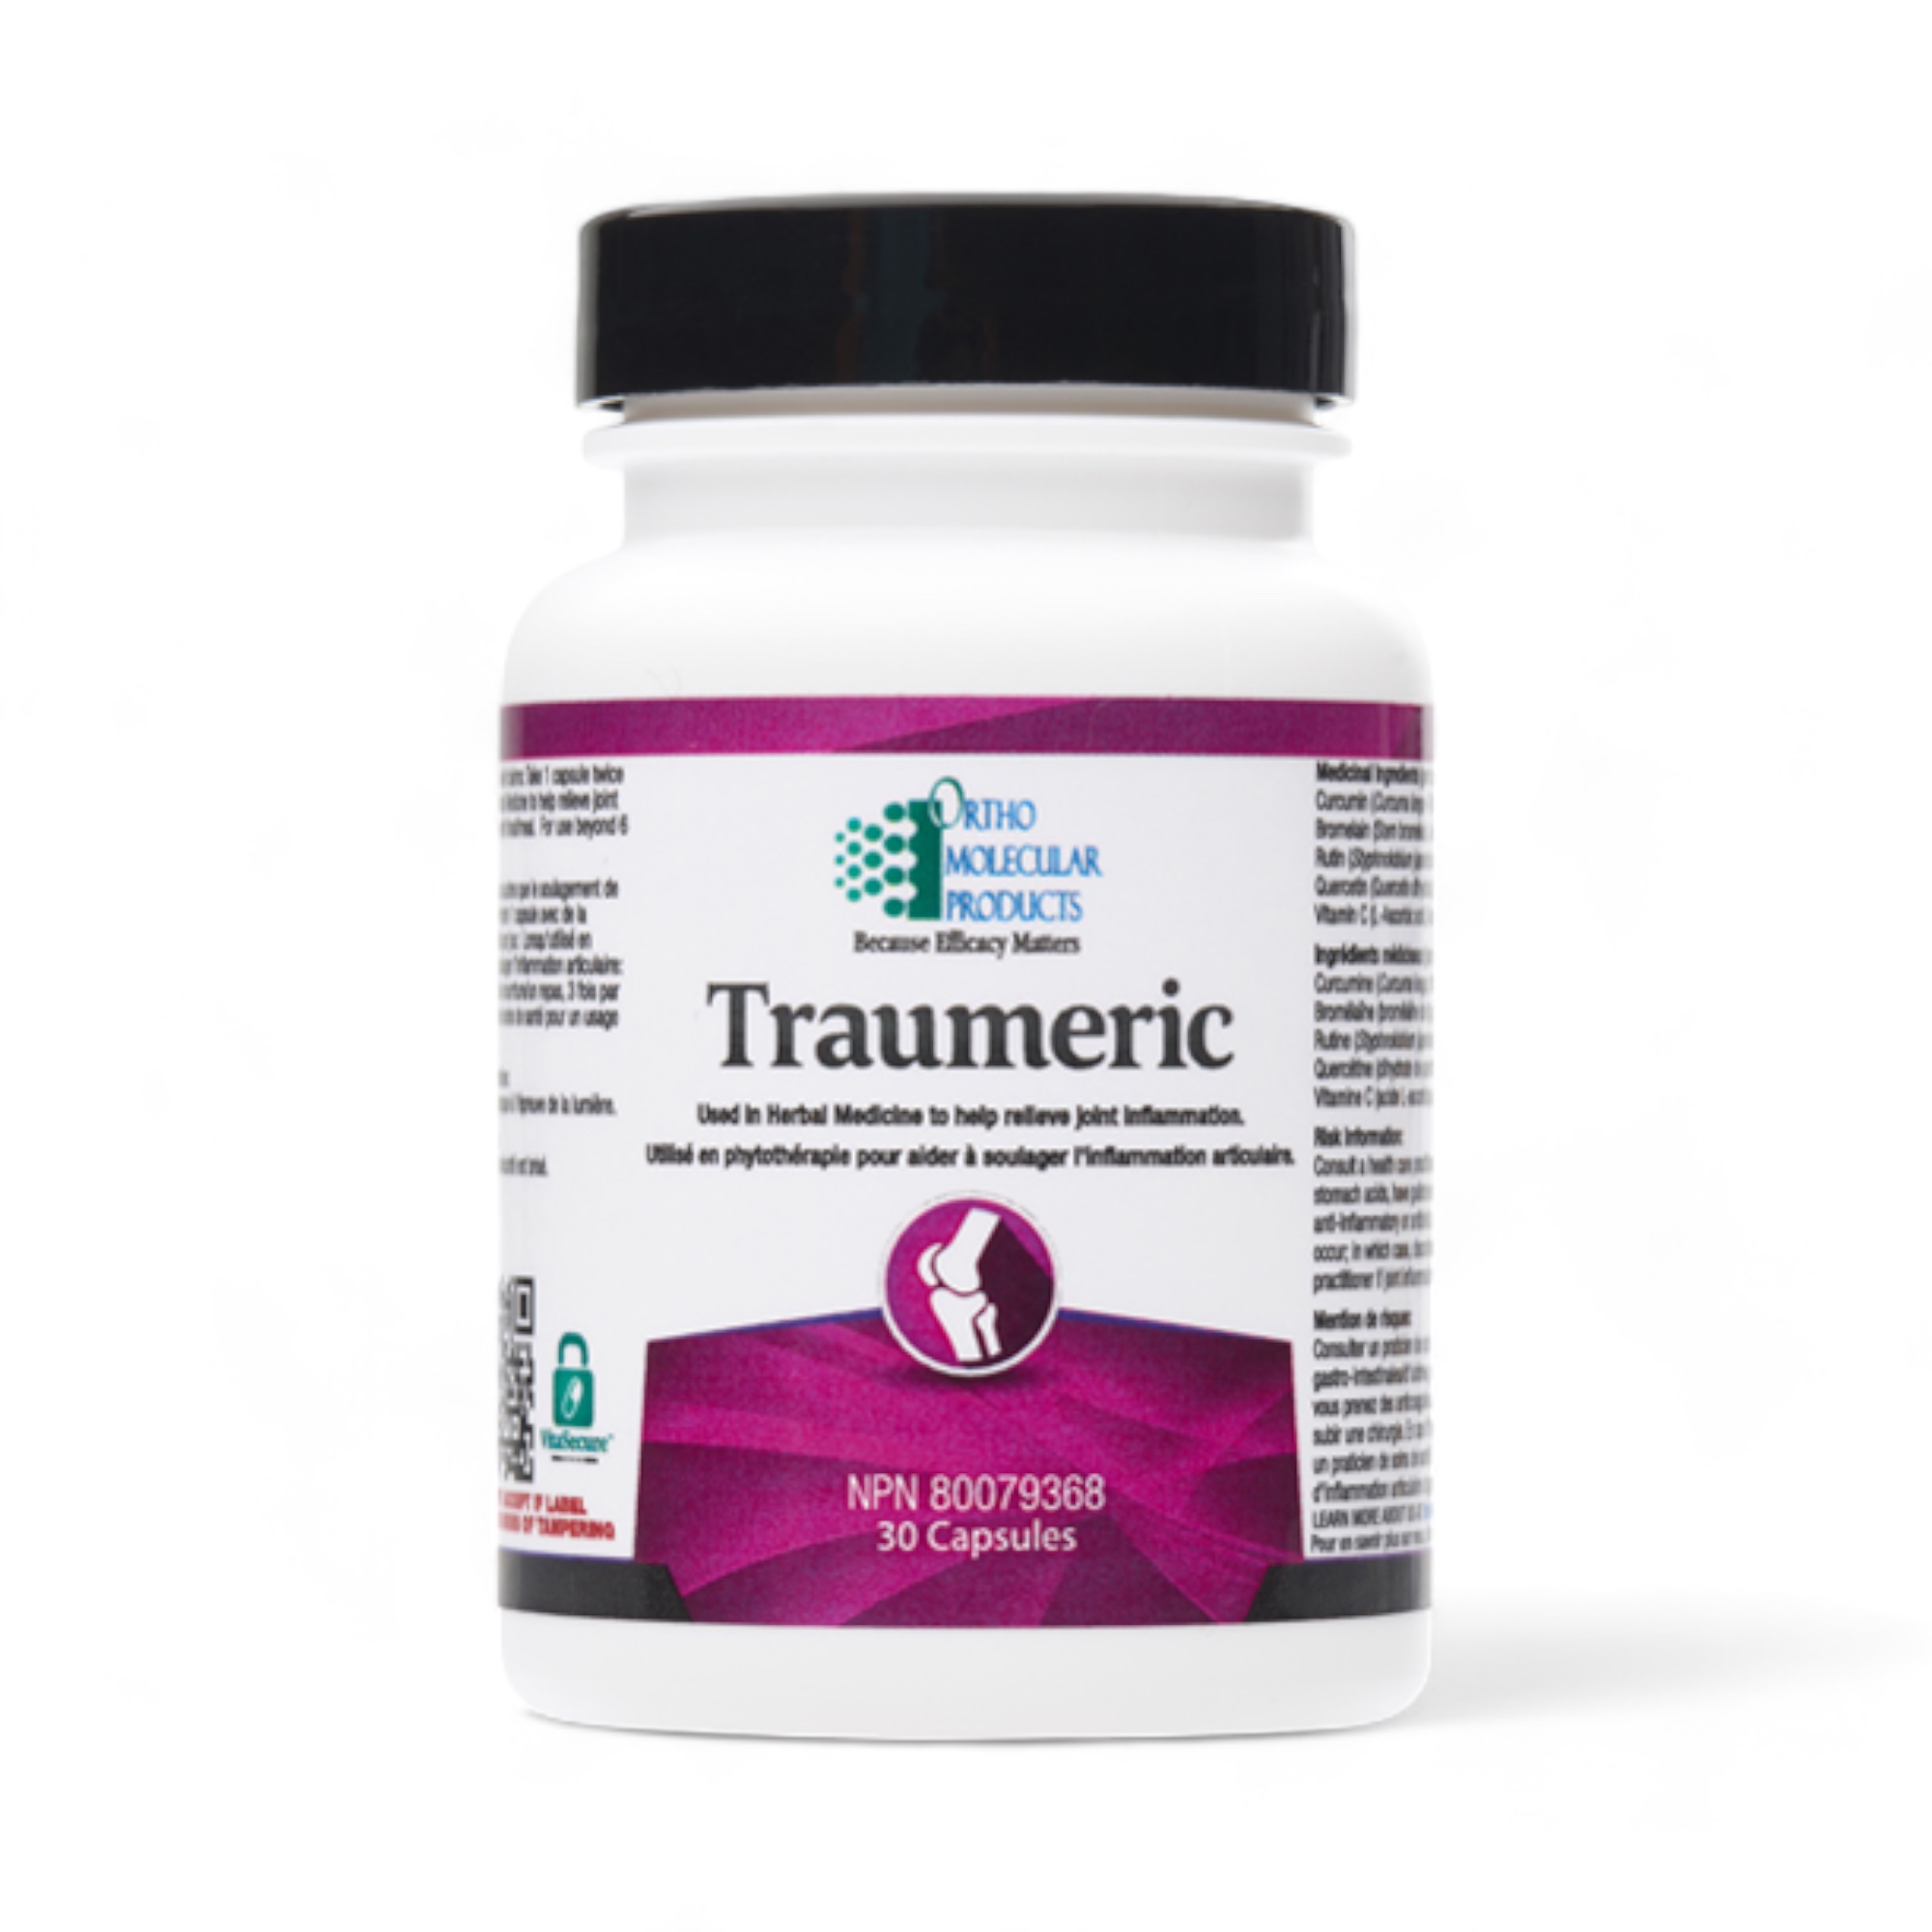 Traumeric 30 capsules Ortho Molecular Products